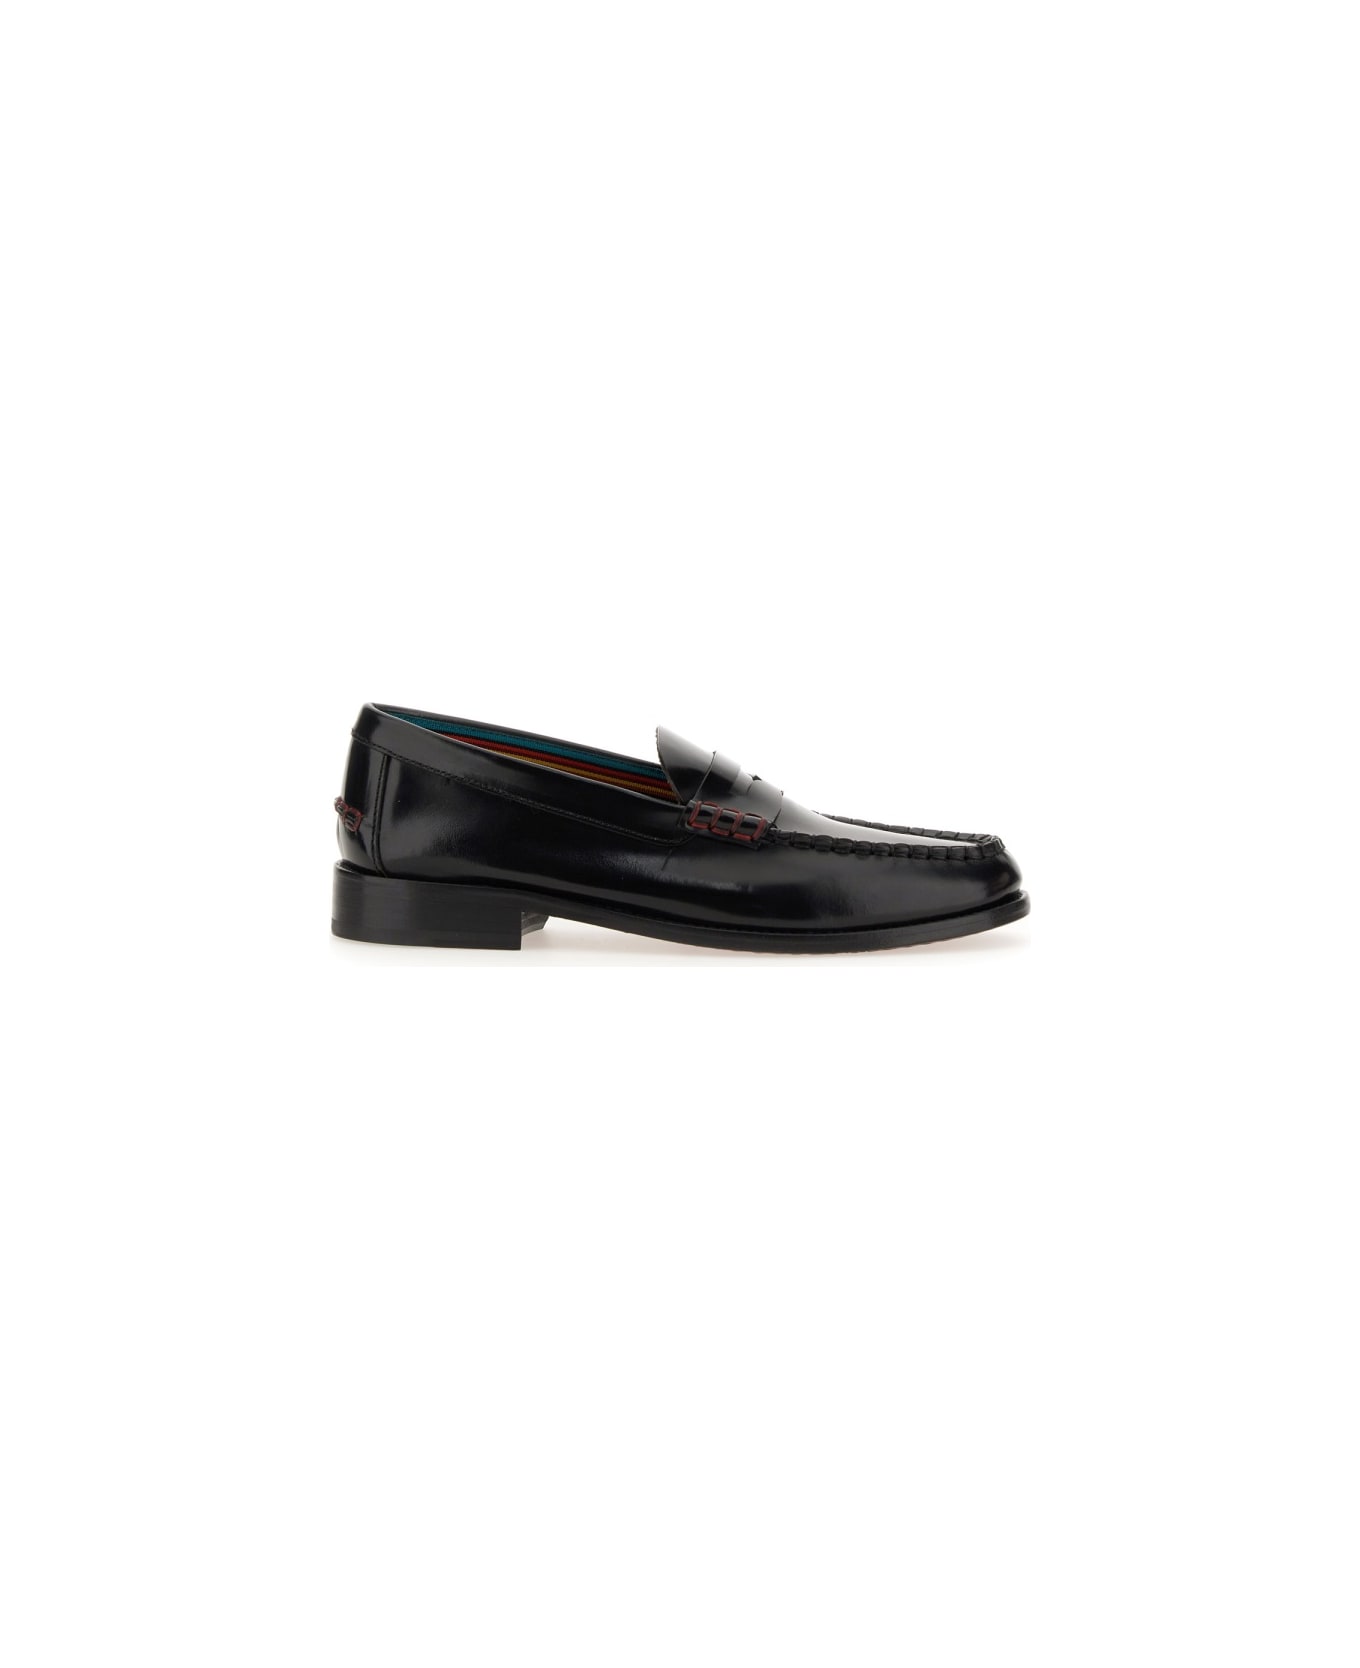 Paul Smith Leather Loafer - BLACK